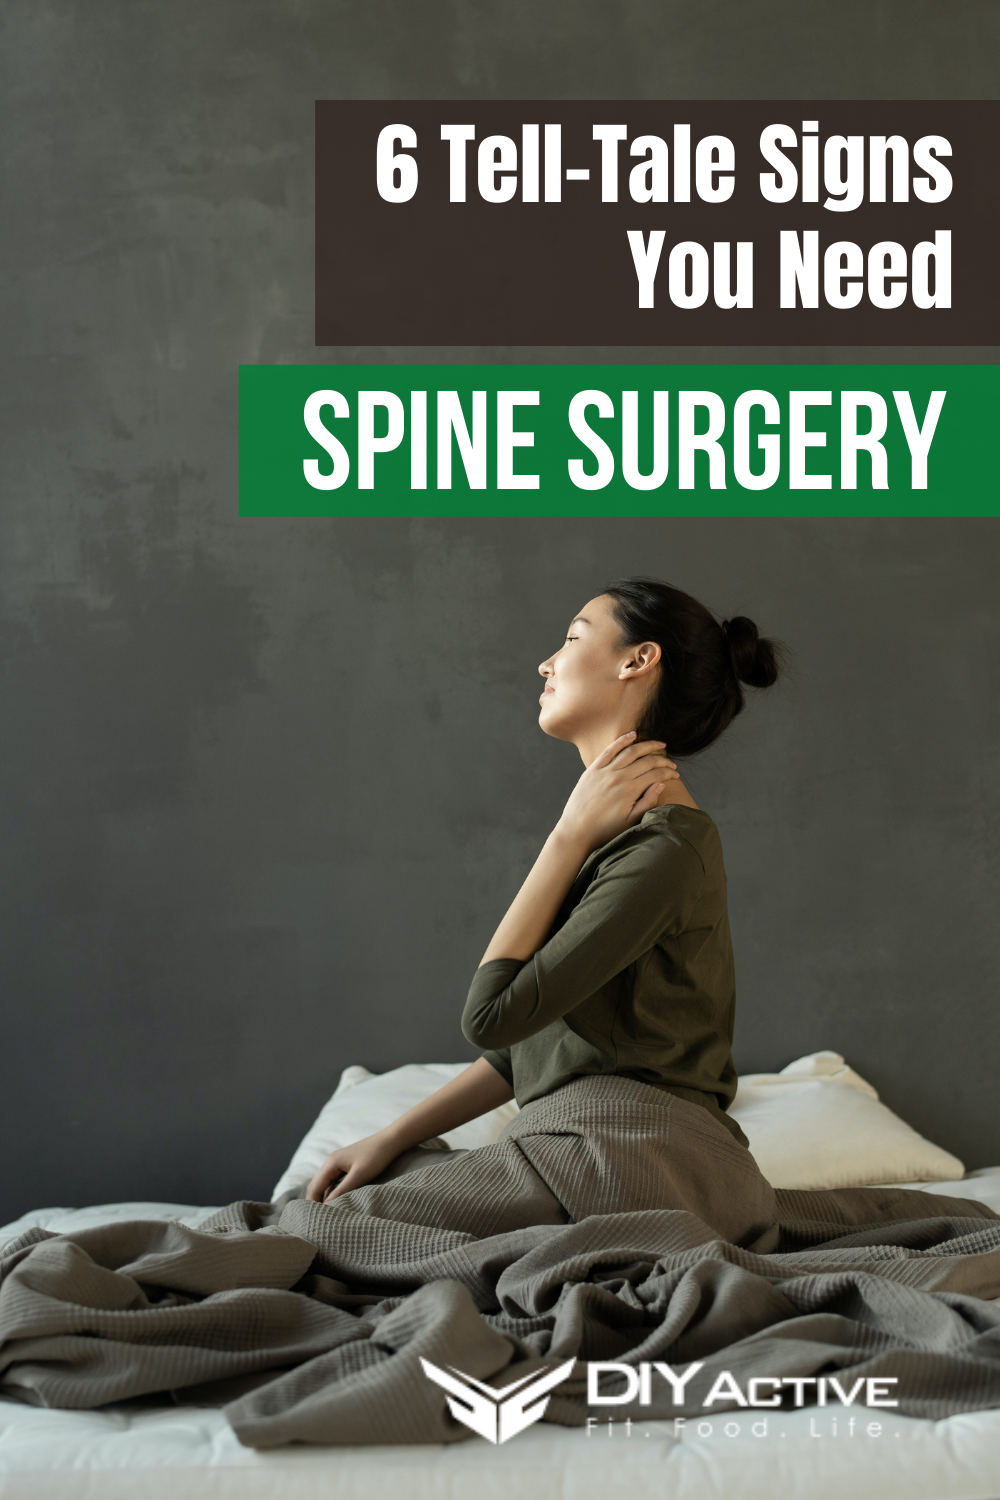 6 Tell-Tale Signs You Need Spine Surgery